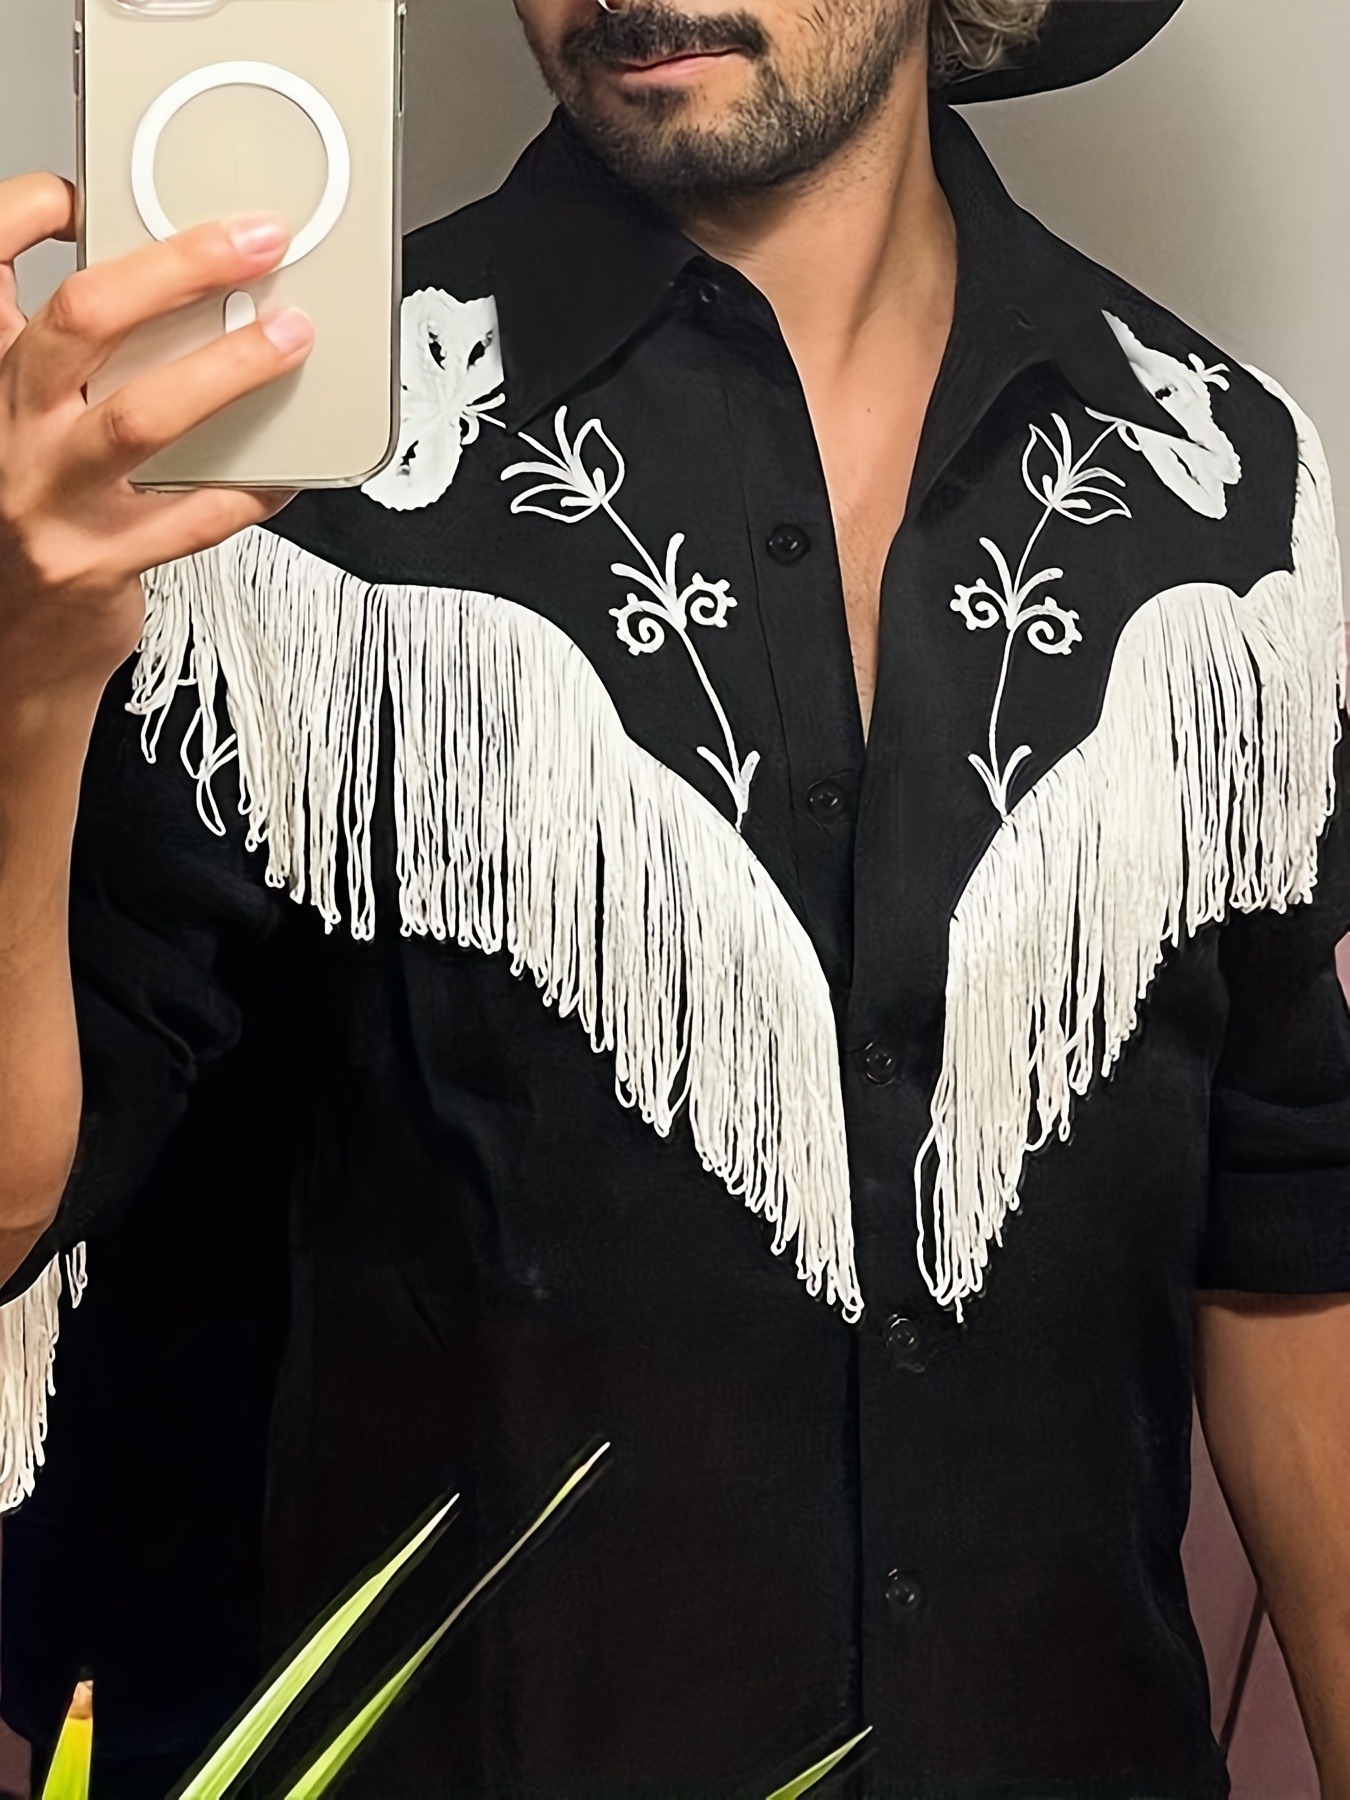 Men's Long Sleeve Retro Cowboy Old West Shirt Disco Shirt With Tassel Casual Beach Tops Festival Party Dress Shirt V-Neck Tops For Men, Coquette